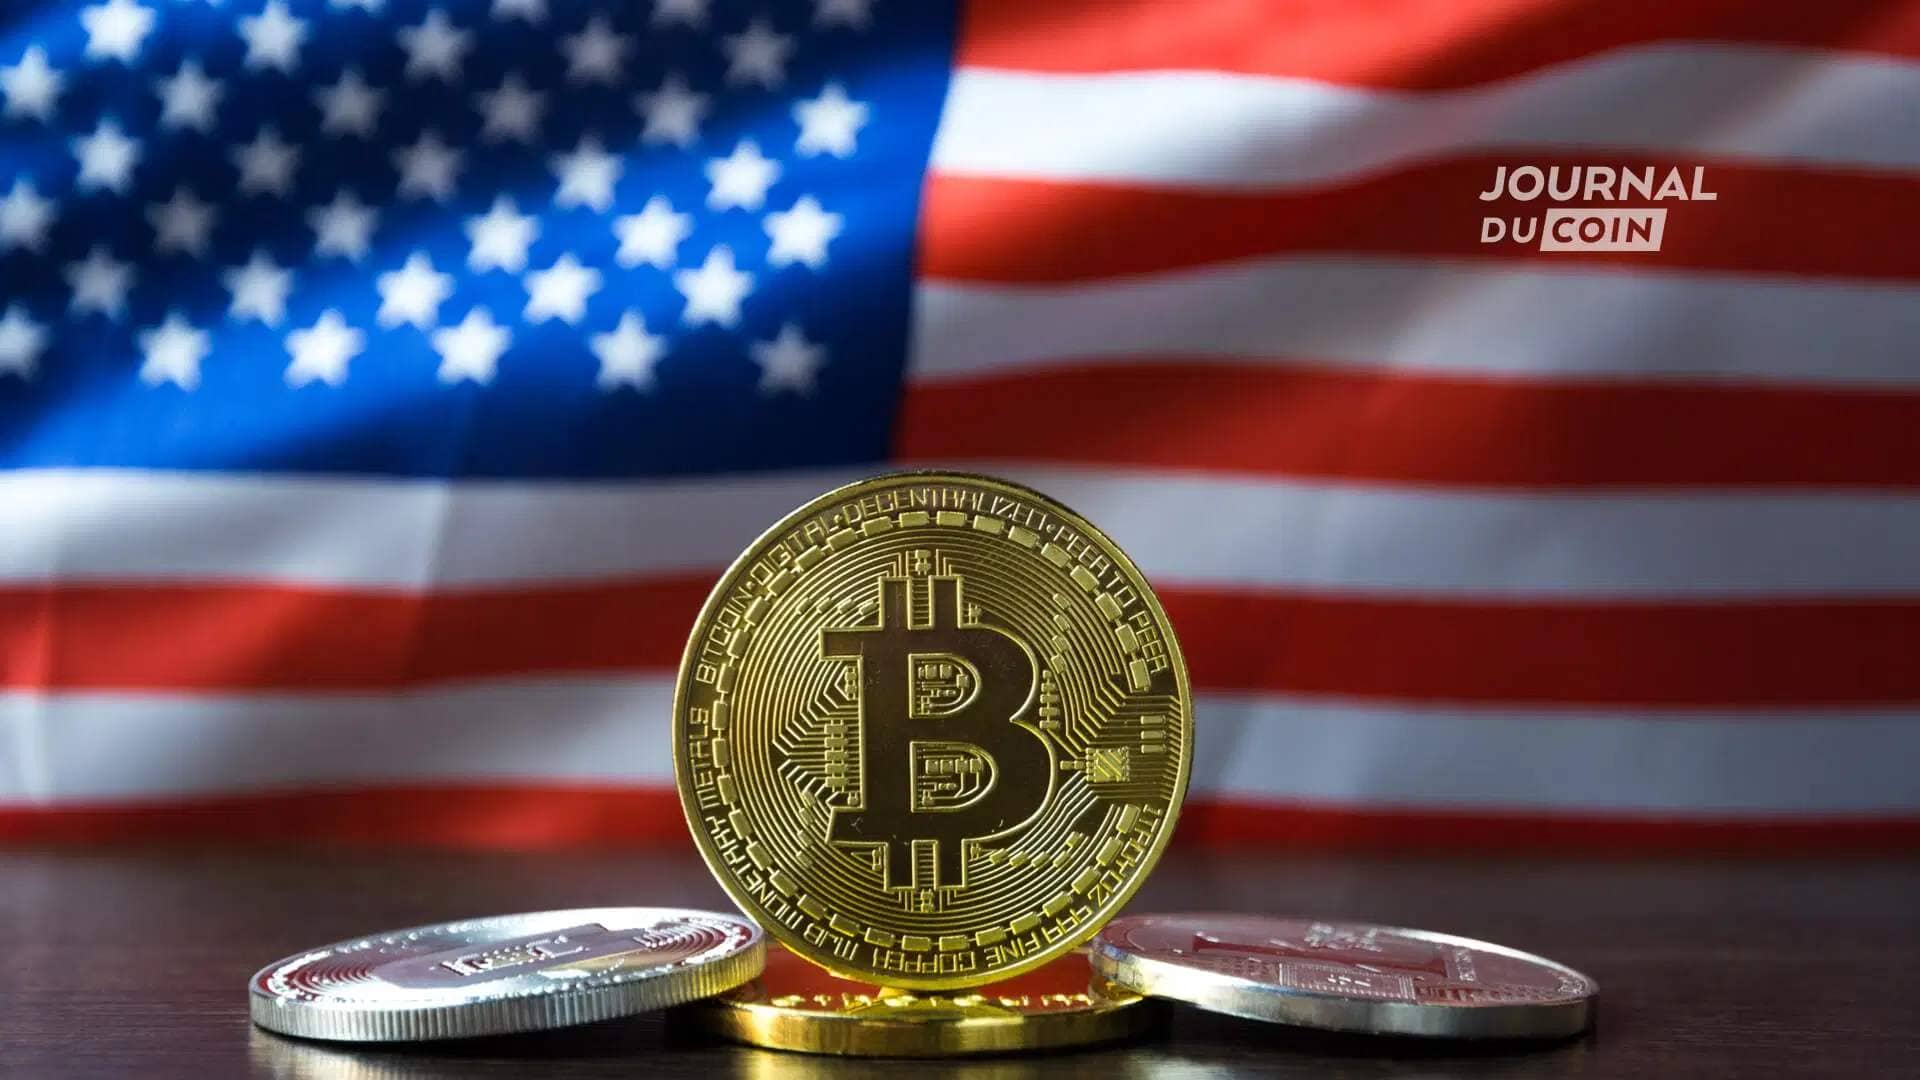 The SEC refuses any request to open a Bitcoin spot ETF on American soil